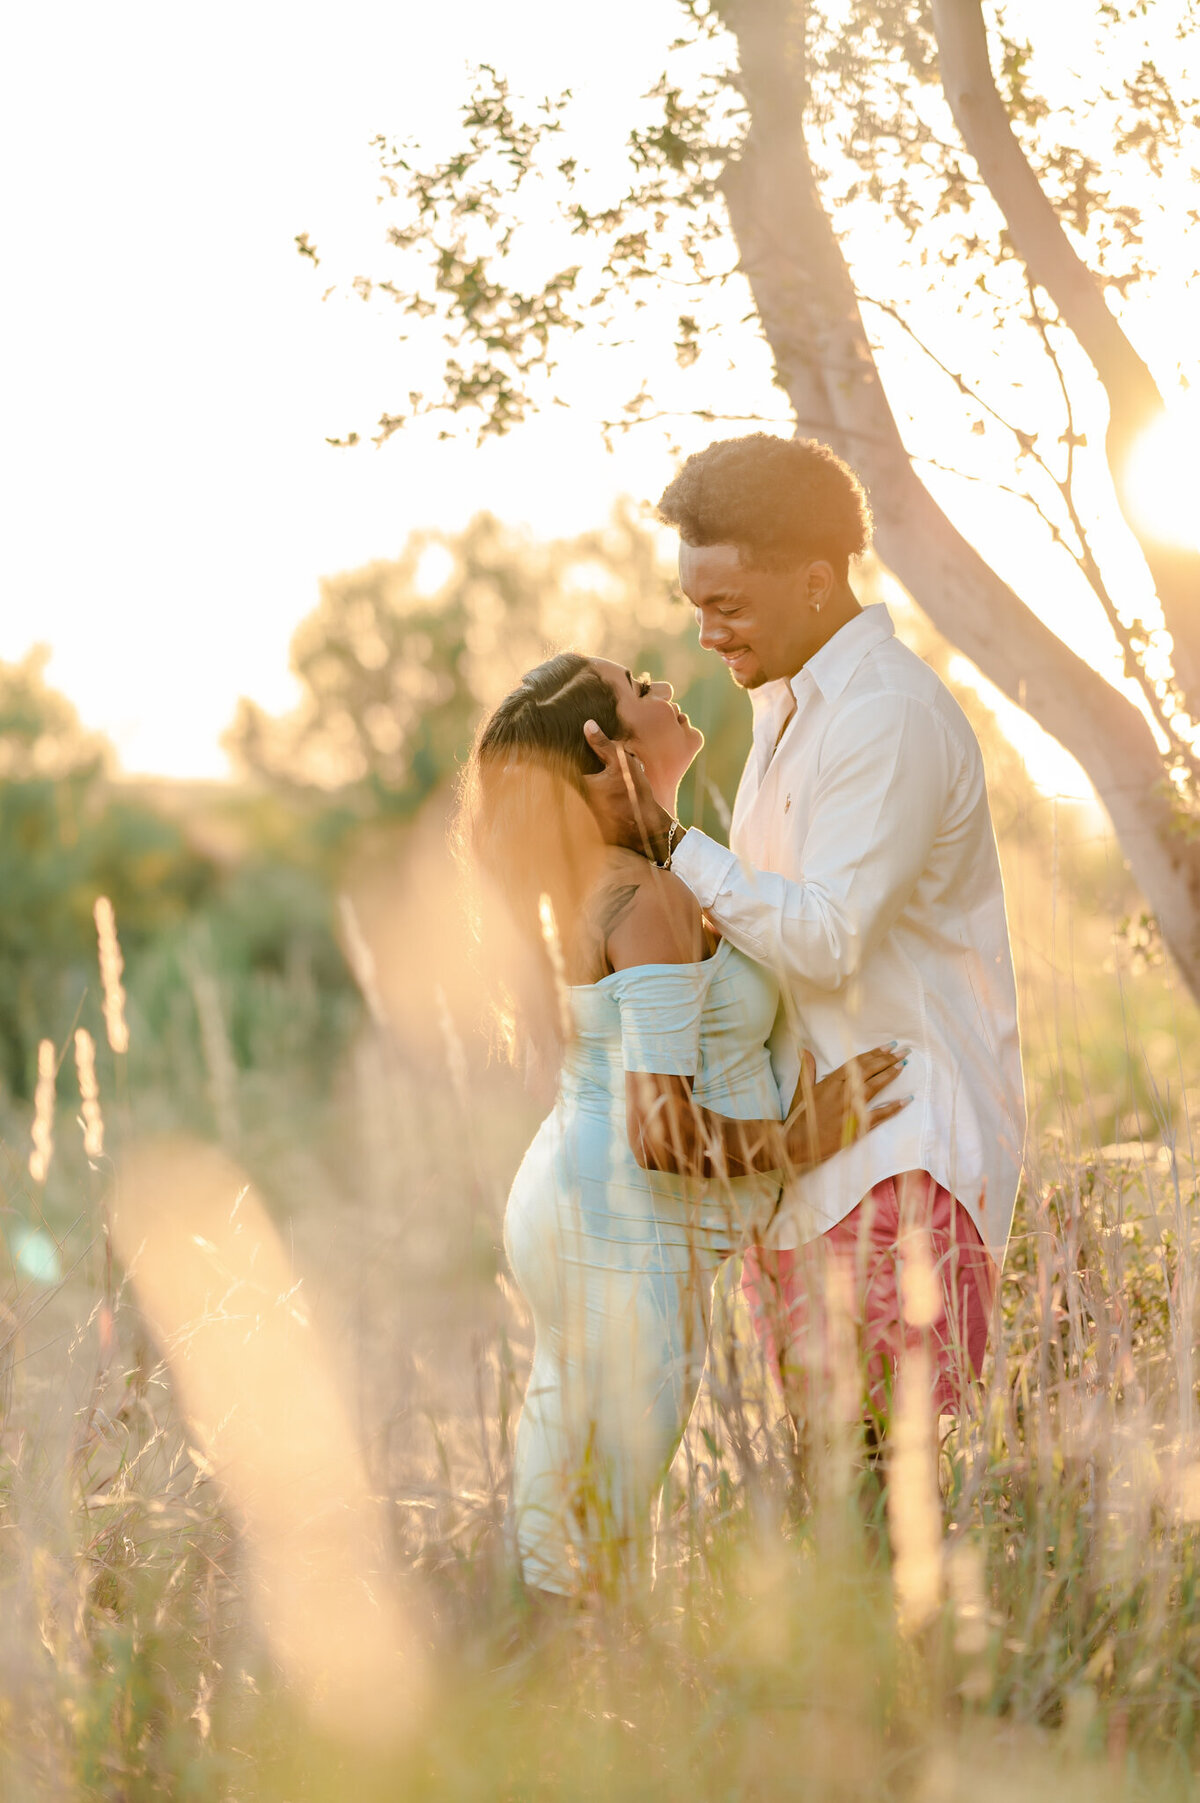 Pregnant couple embraces during sunrise glow. Professional maternity photography at Phil Hardberger Park in San Antonio.